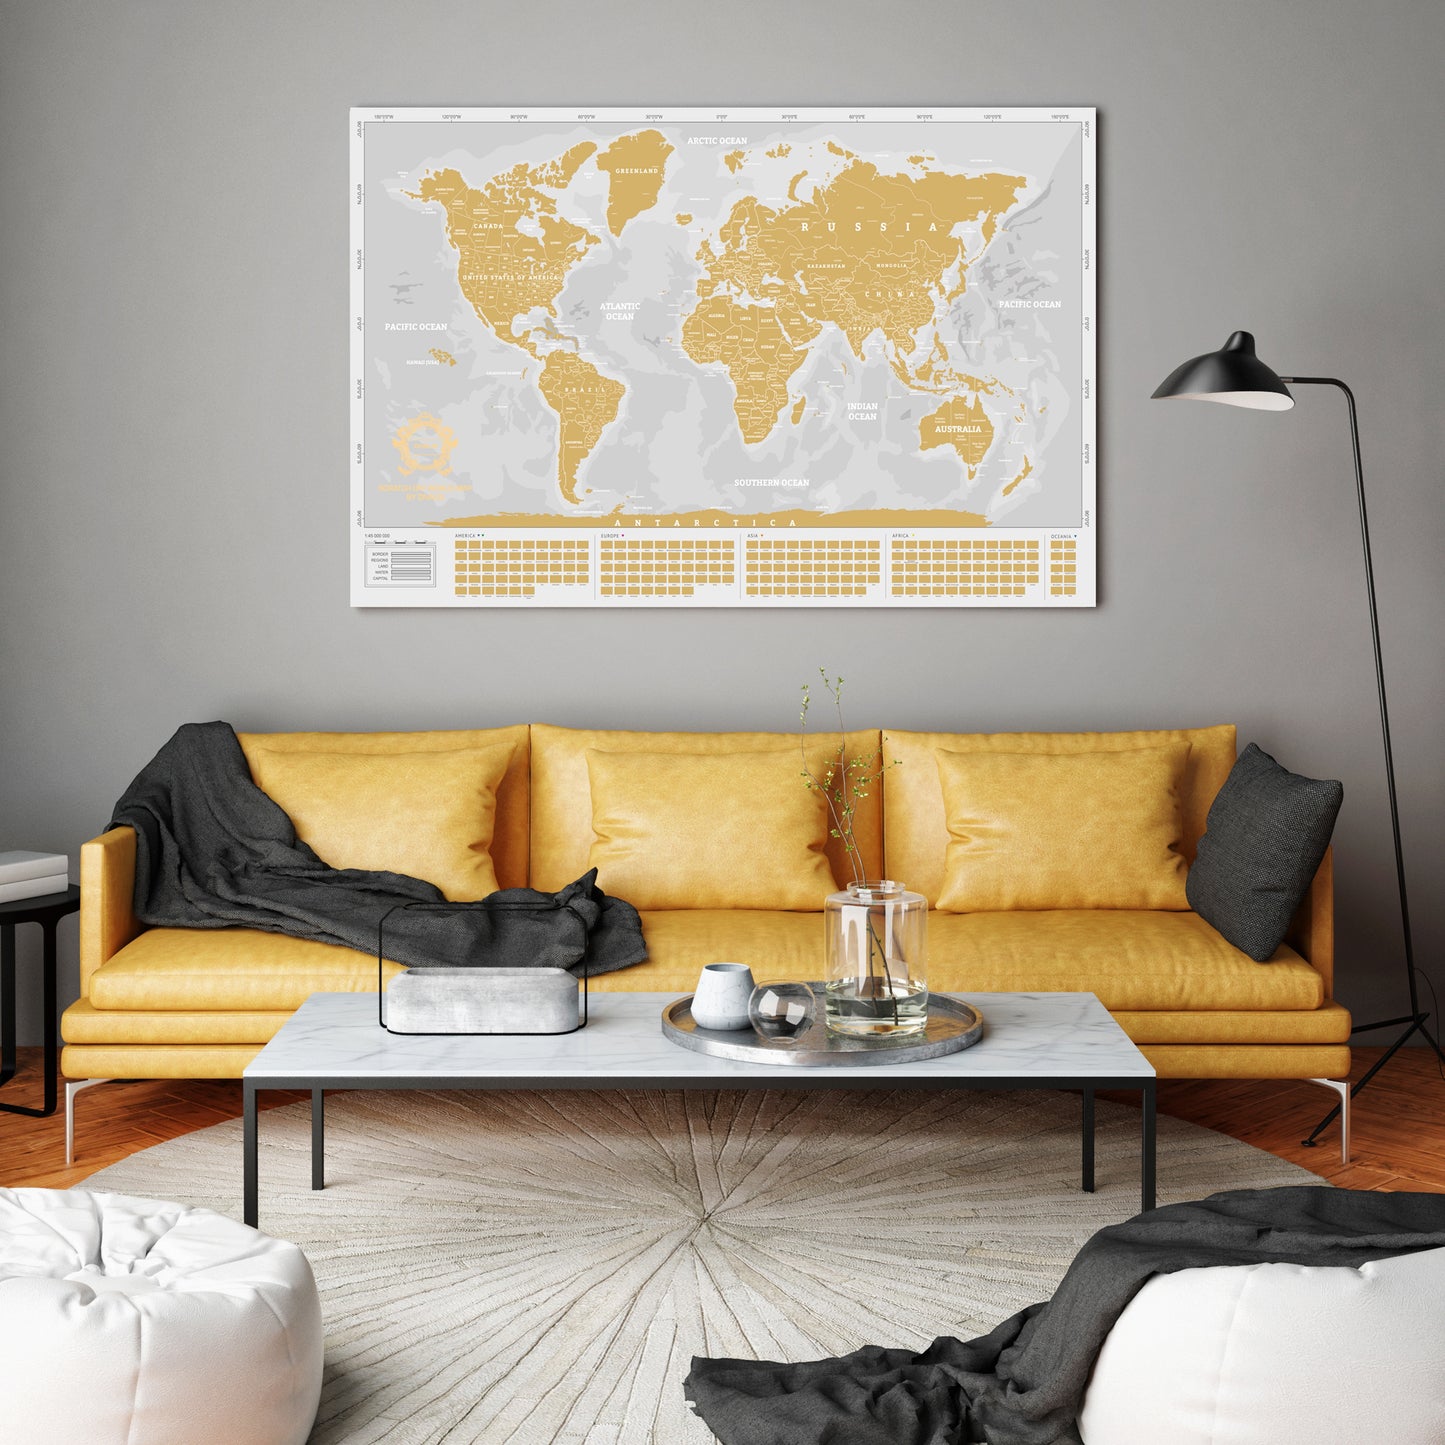 White and Gold Large Scratch off World Map Where We Have Been by Divalis